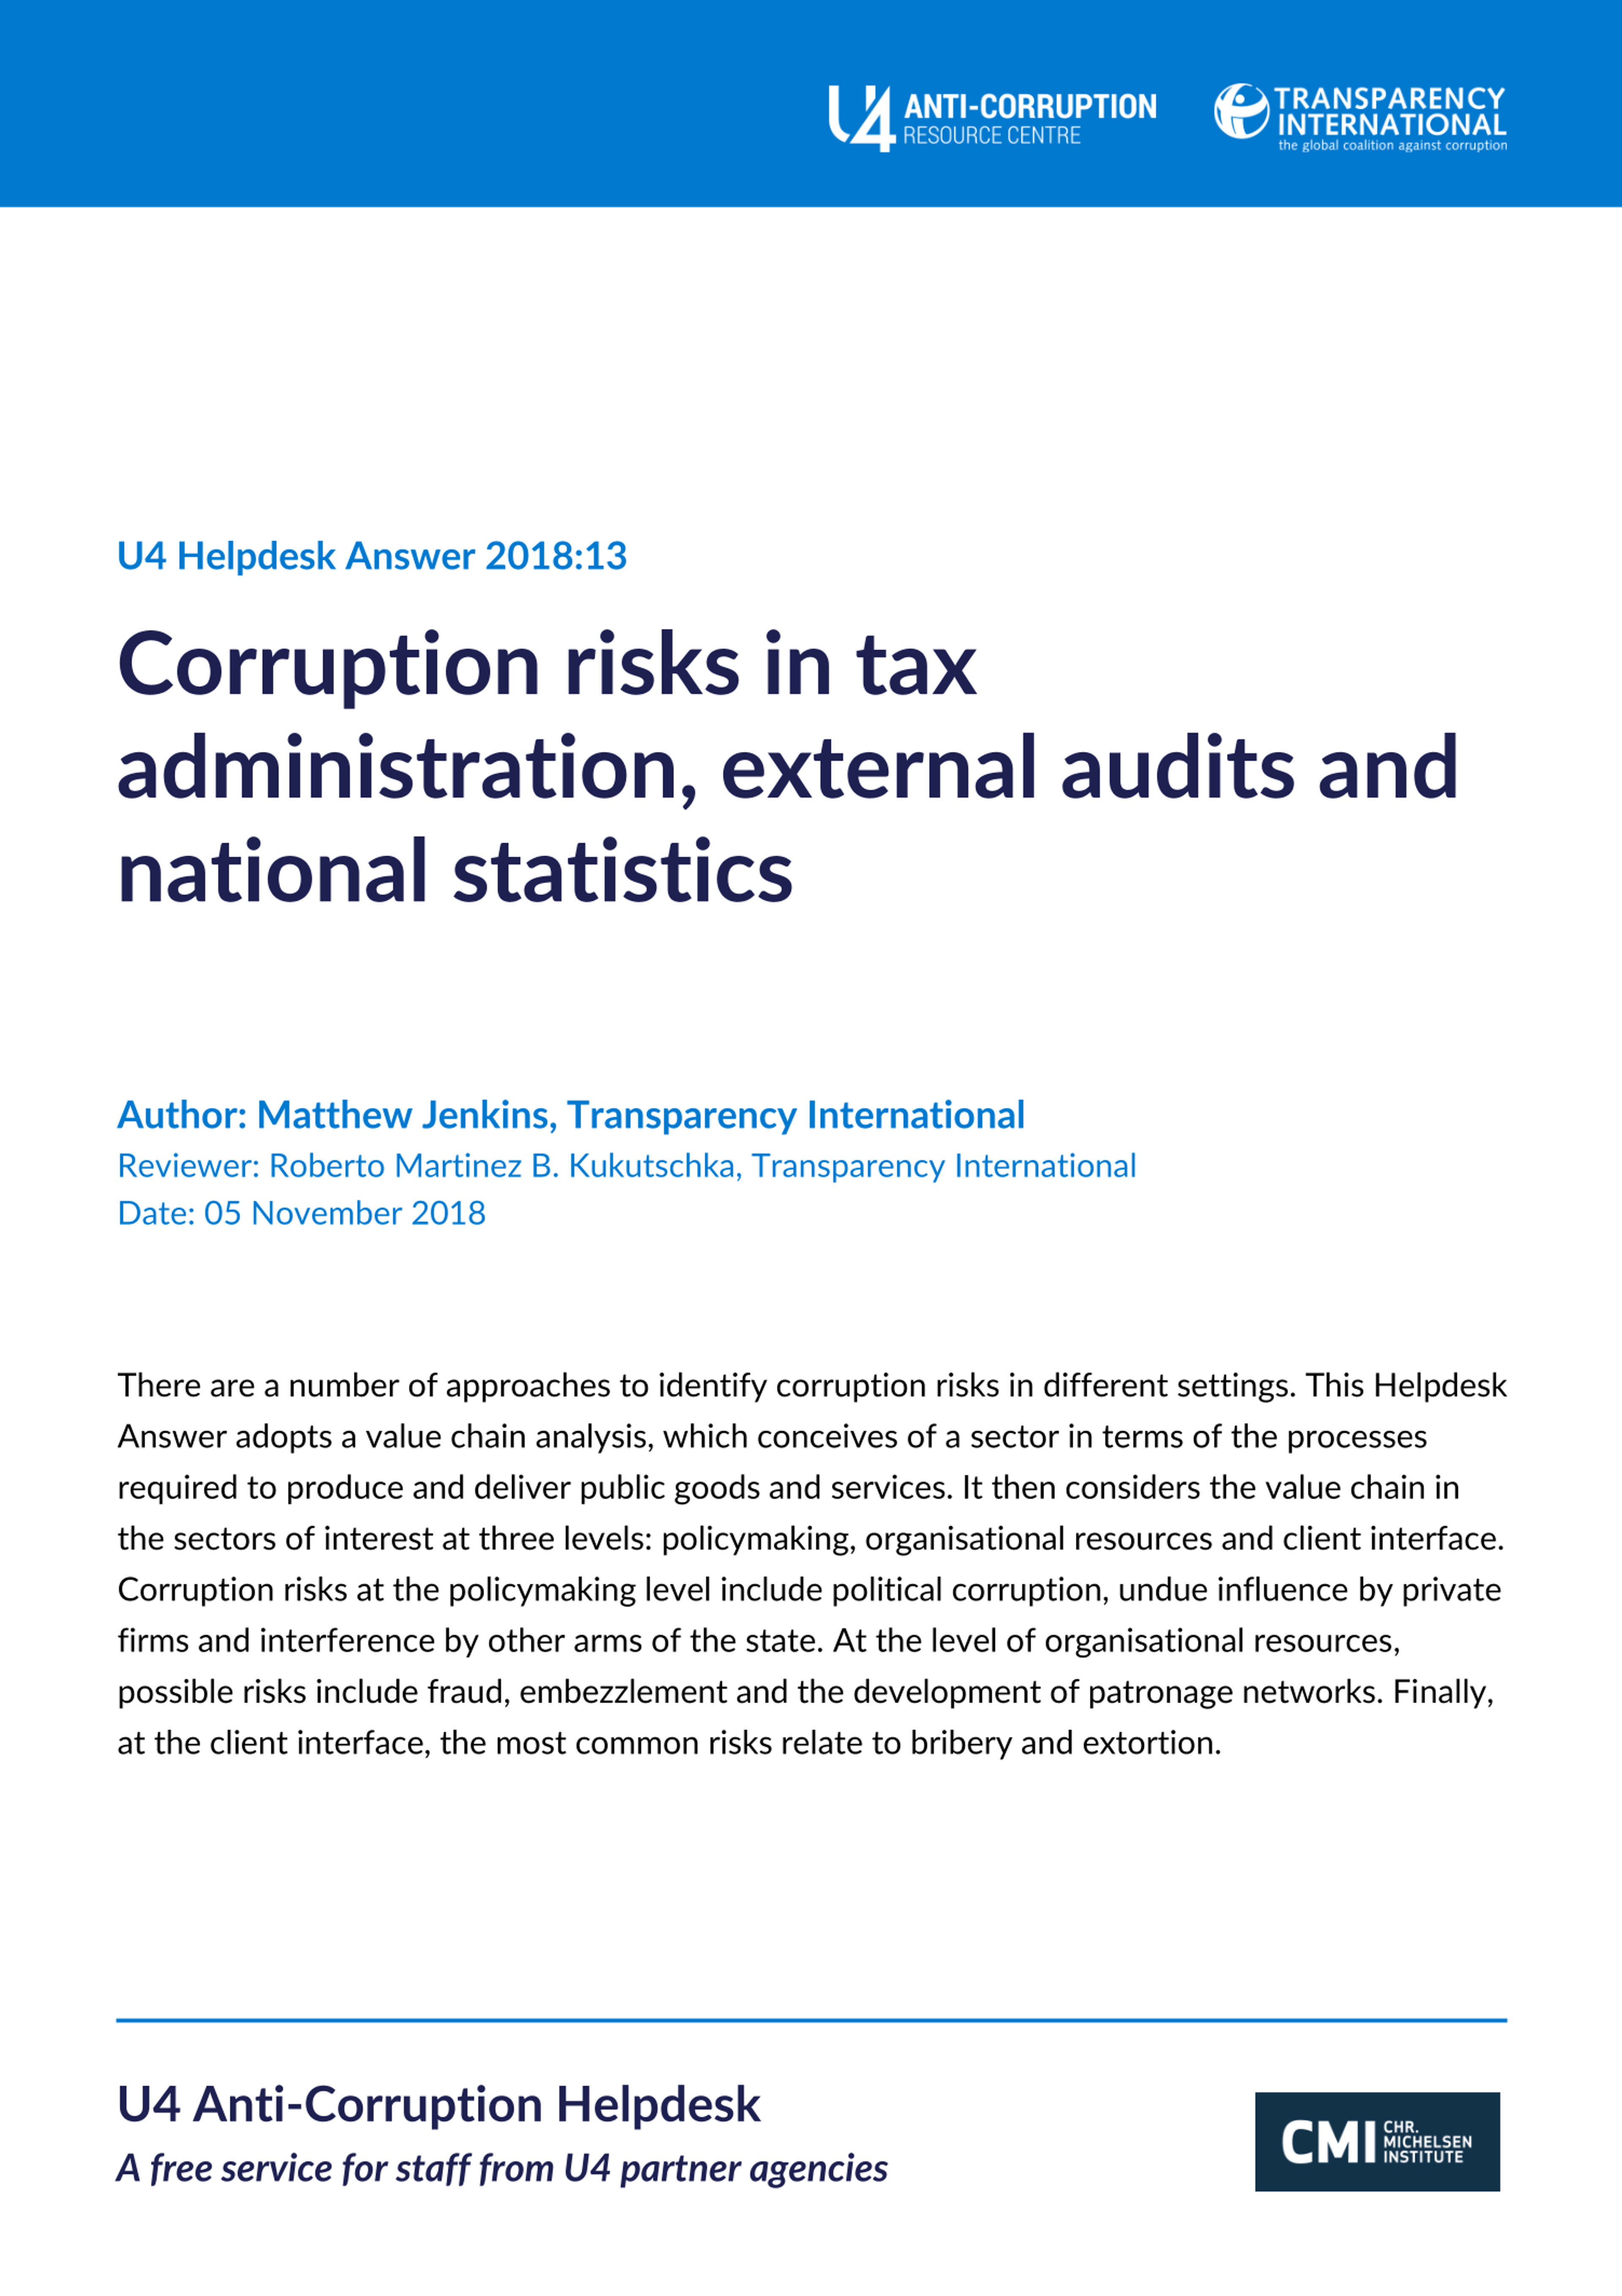 Corruption risks in tax administration, external audits and national statistics